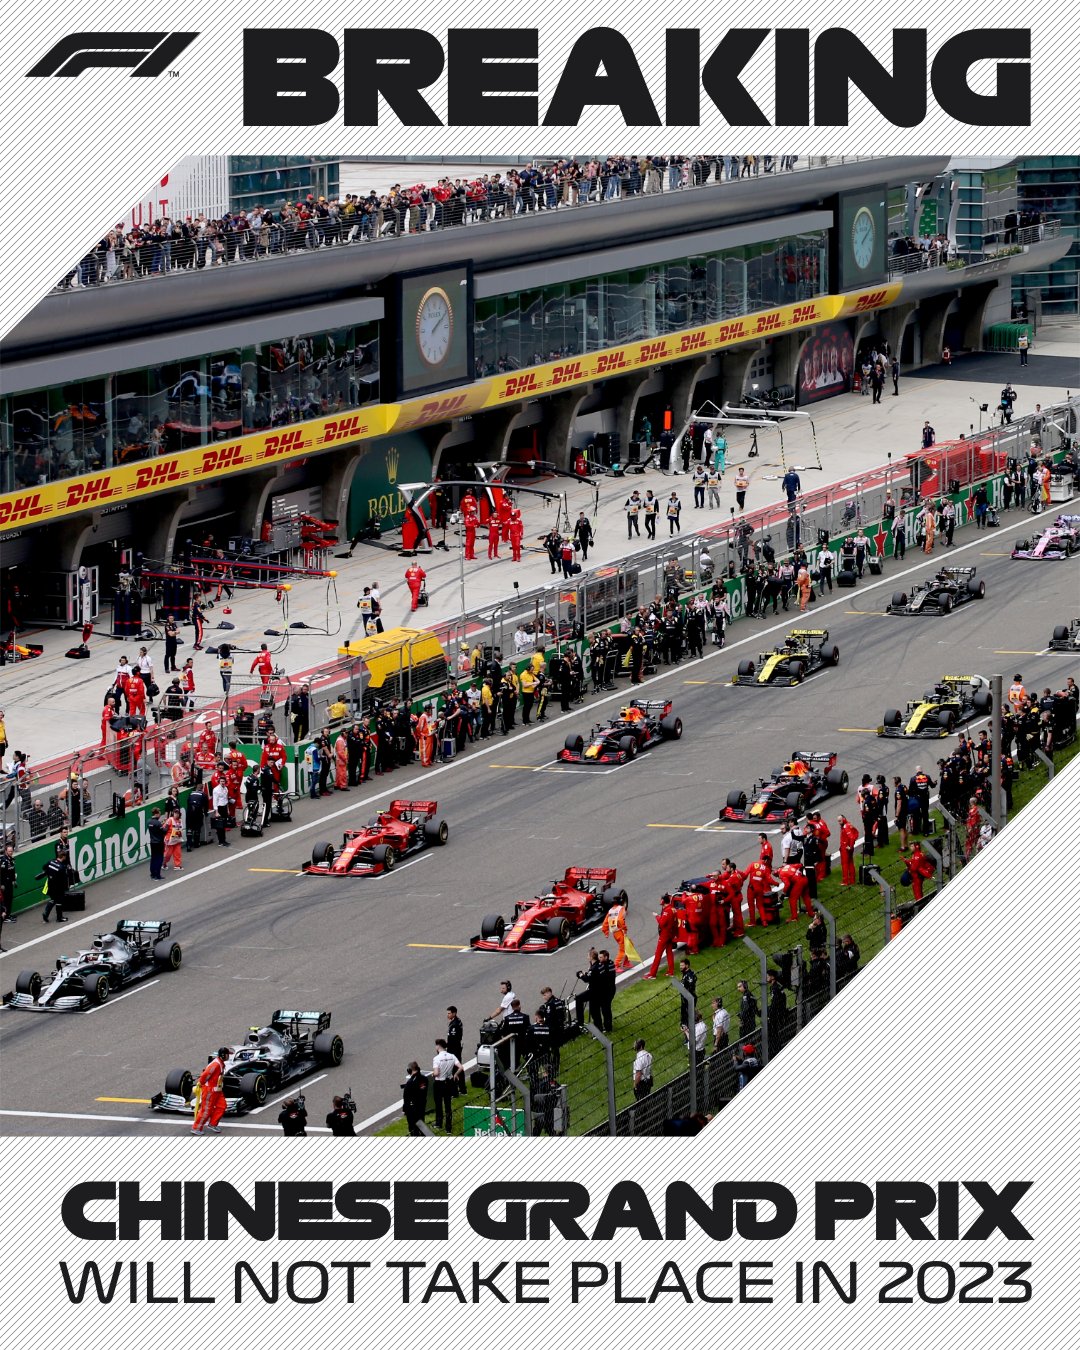 The Chinese Grand Prix "its going down" of the F1 calendar in 2023